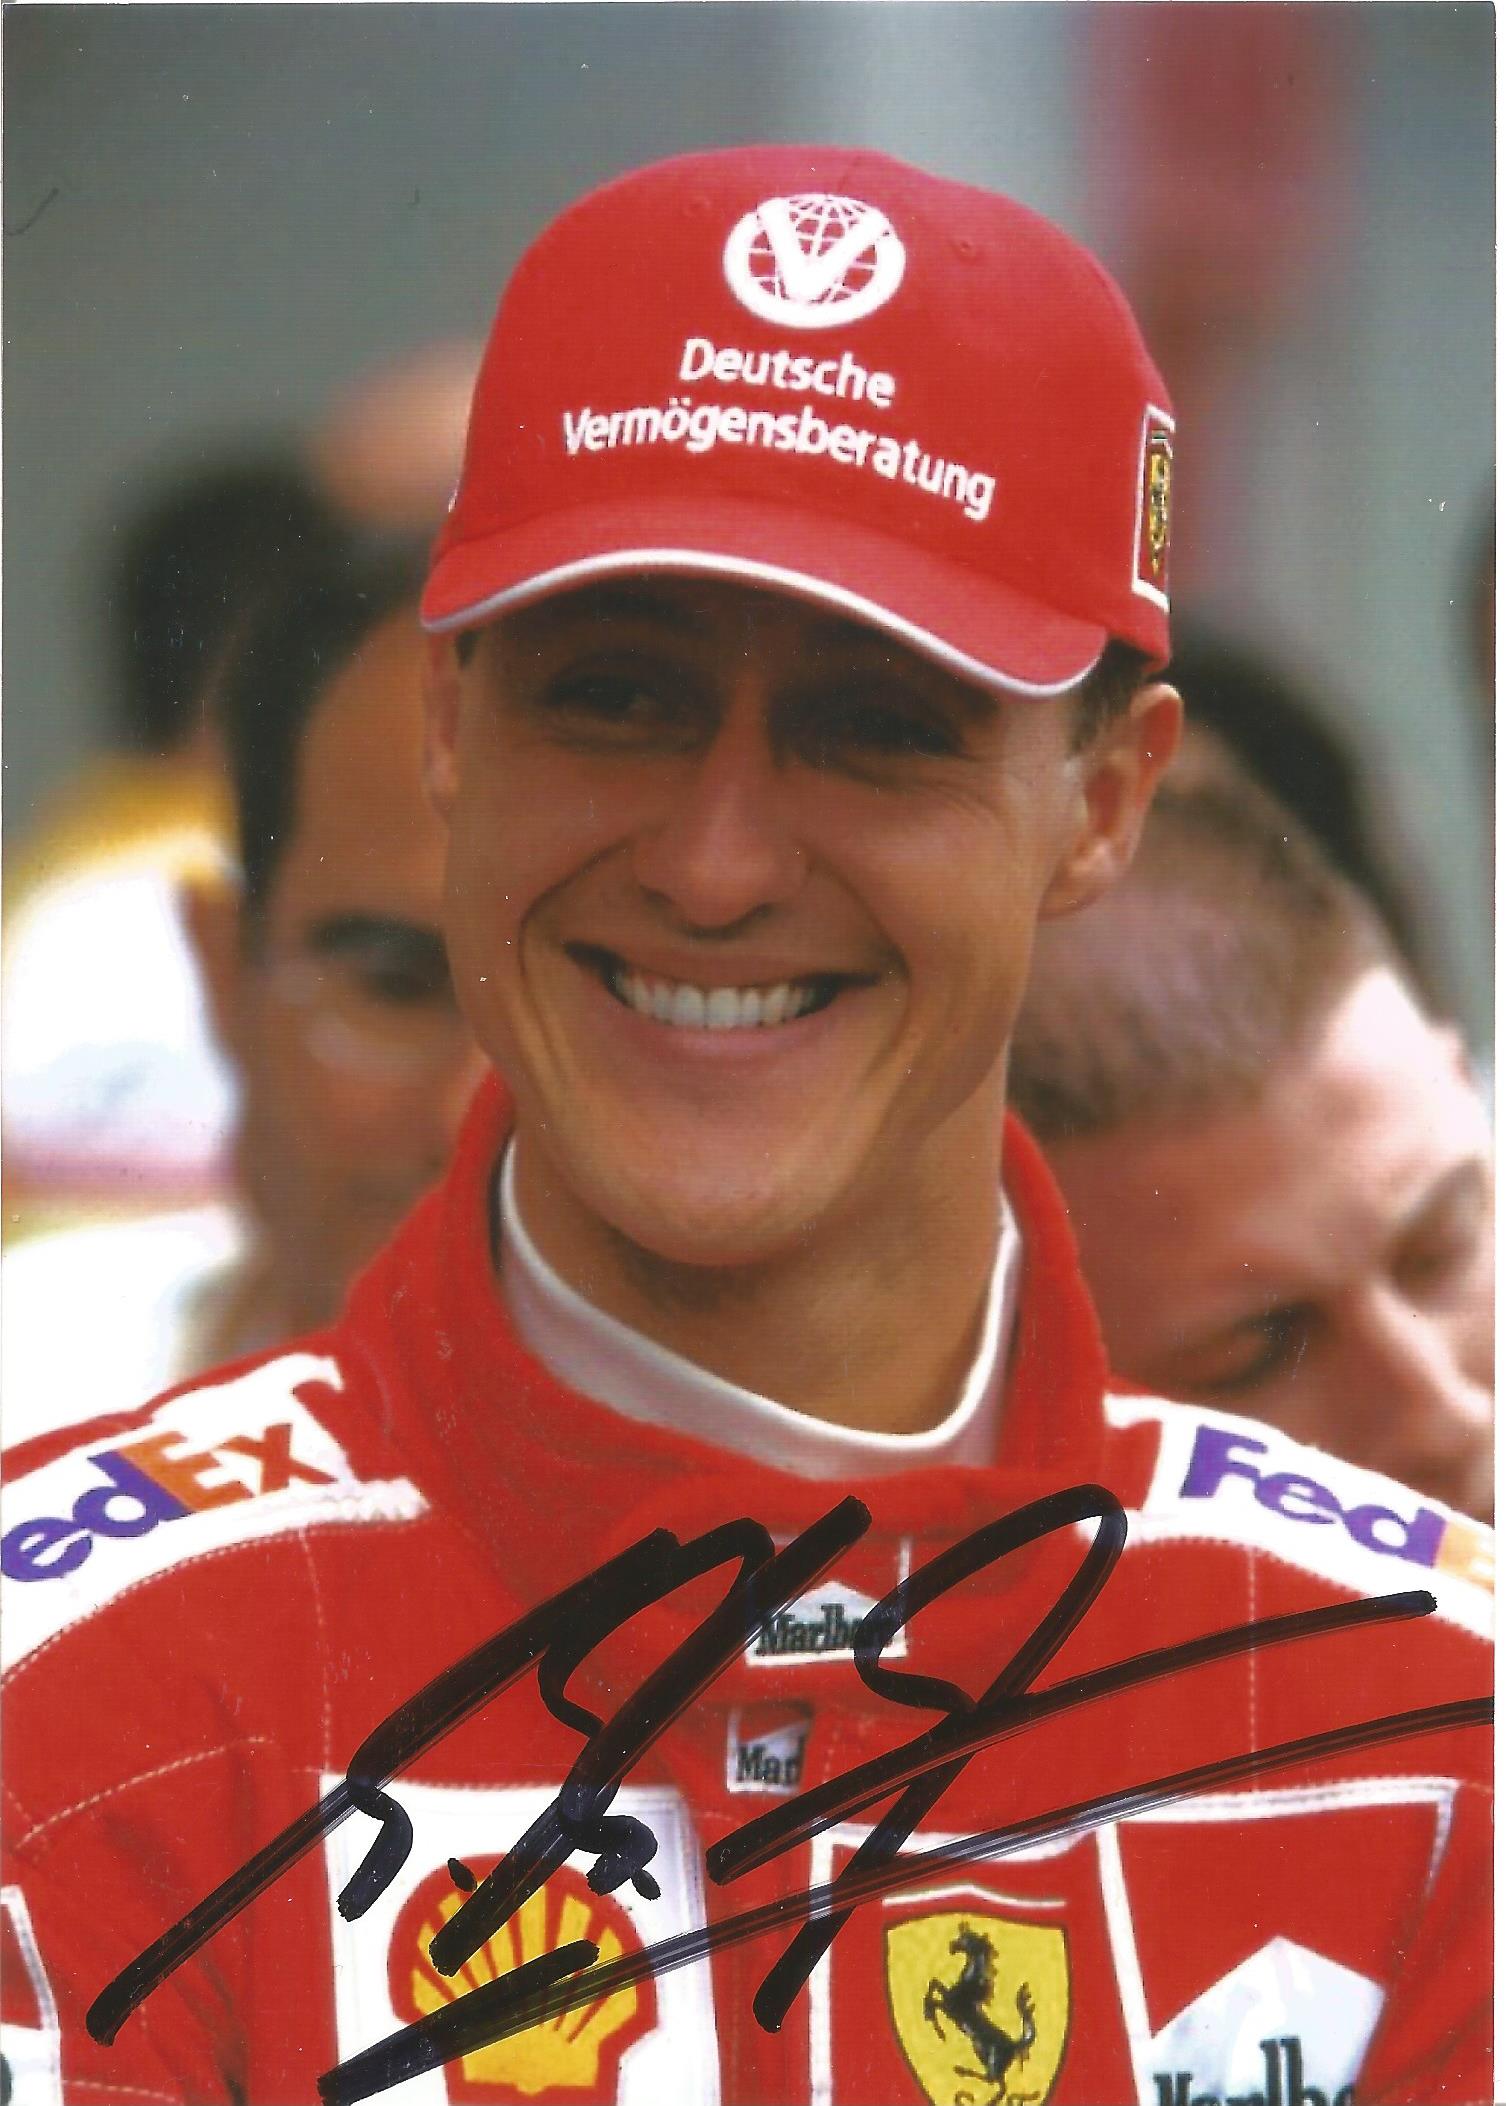 Michael Schumacher 7x5 signed colour photo. Good Condition. All autographs come with a Certificate